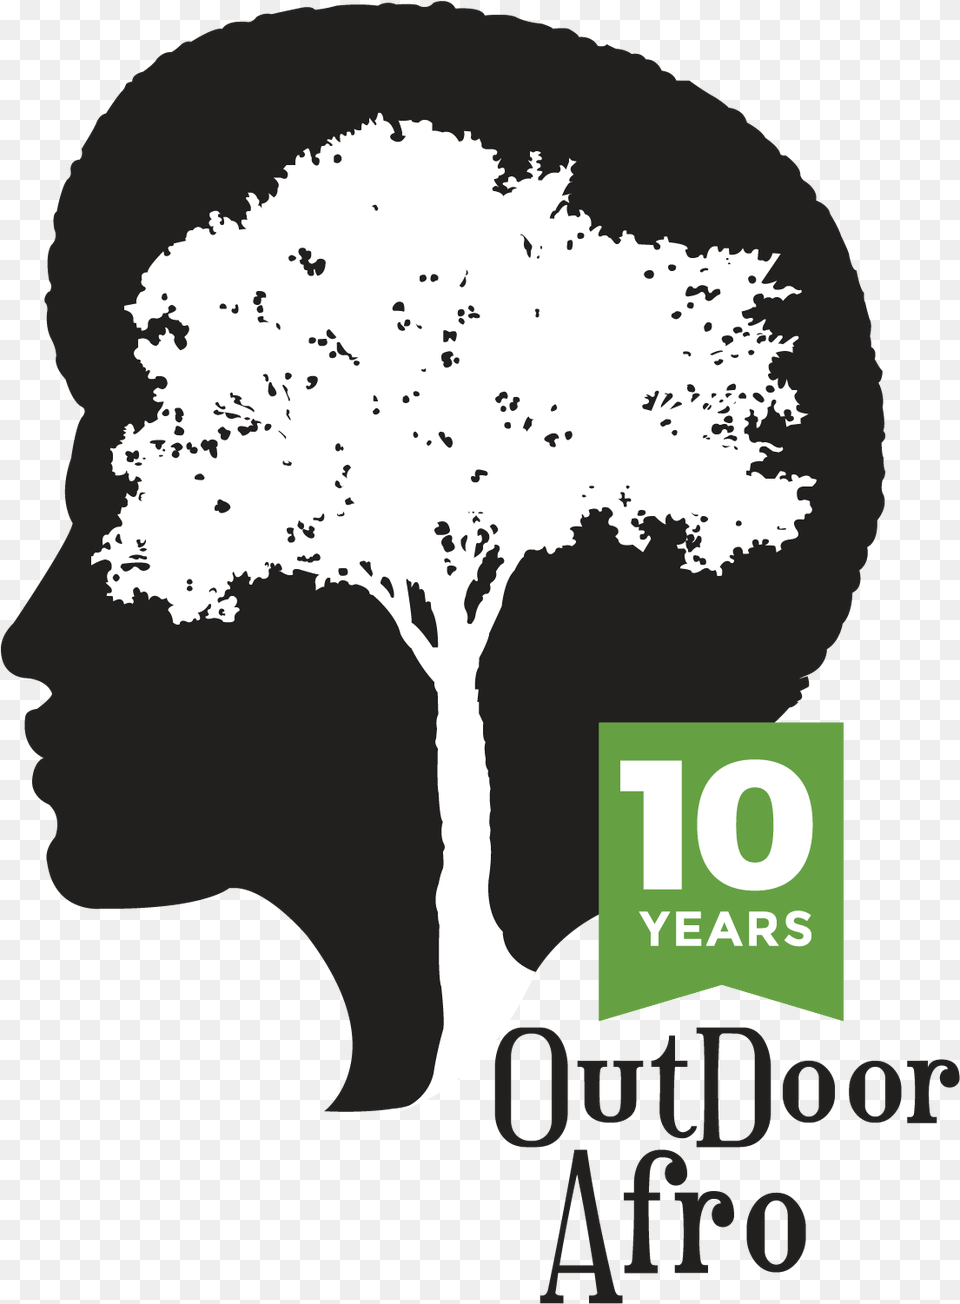 Download Outdoor Afro Hd Uokplrs Camping For Black People, Tree, Plant, Sticker, Person Png Image